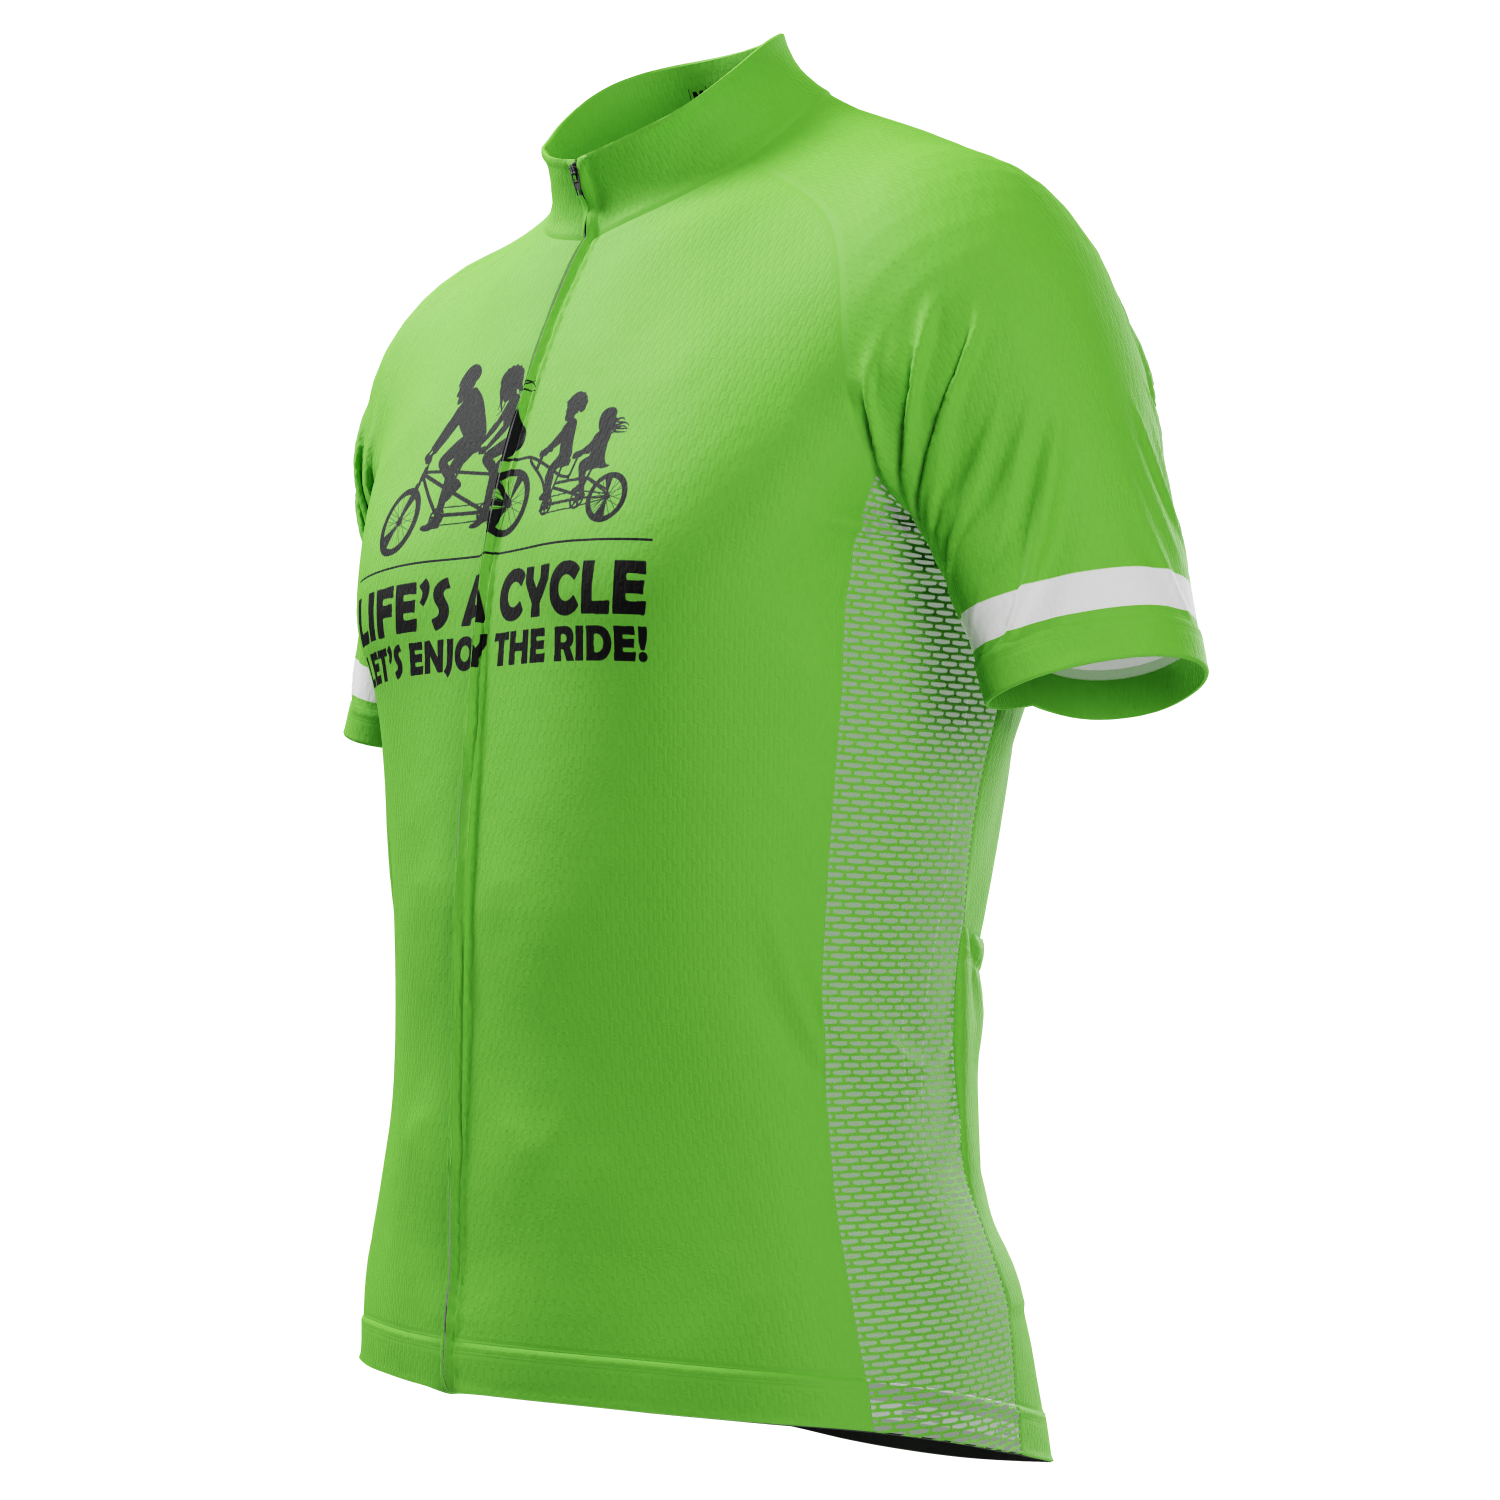 Men's Life's a Cycle, Let's Enjoy The Ride! Short Sleeve Cycling Jersey